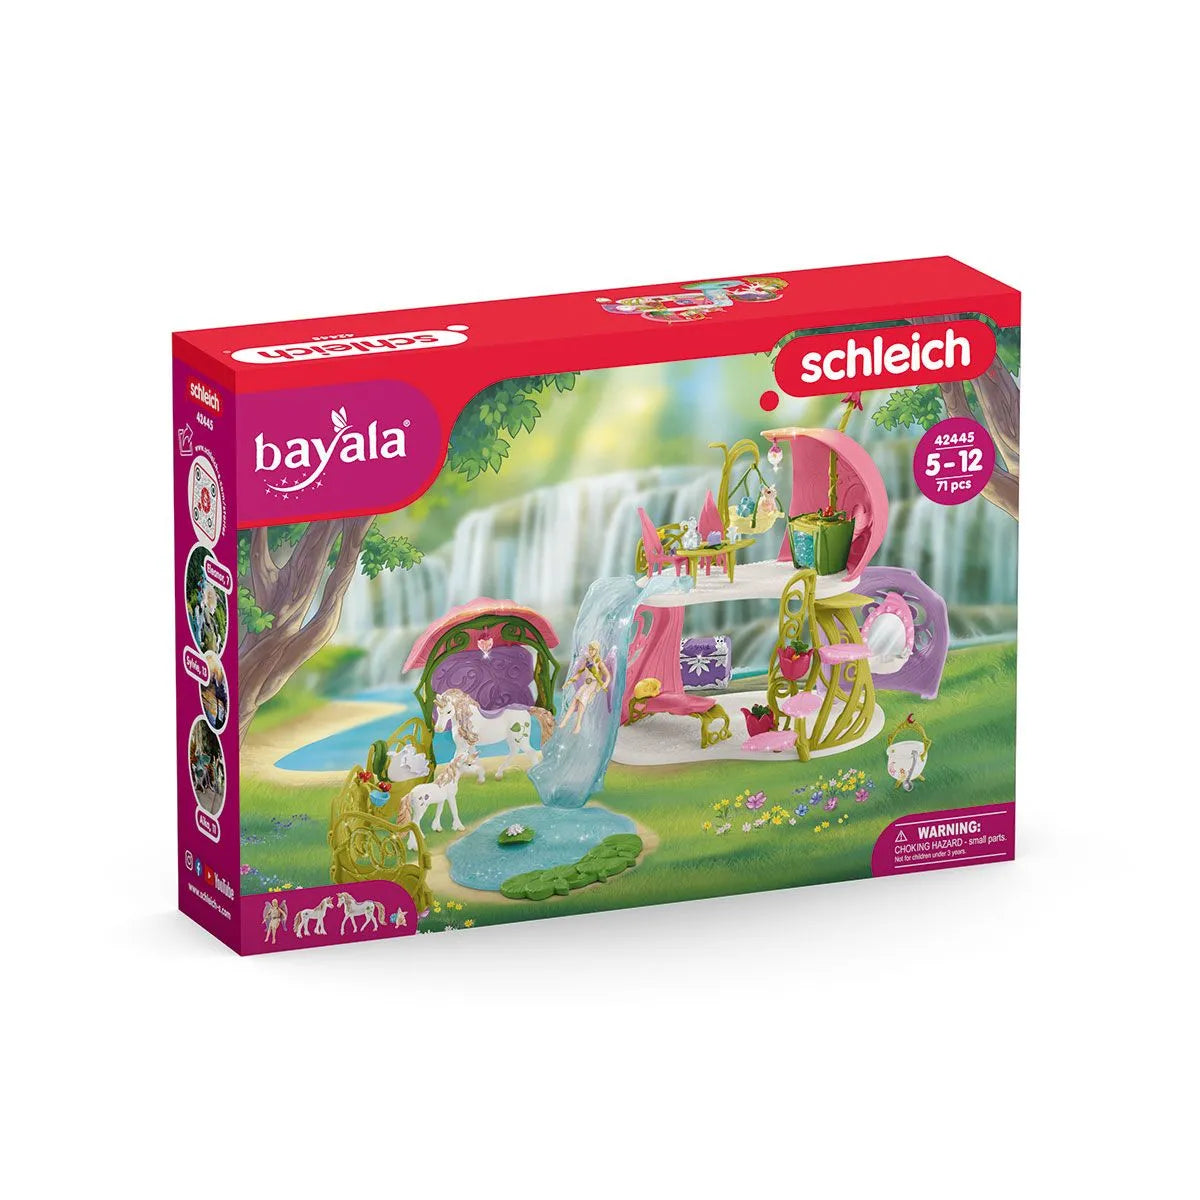 Schleich-Glittering Flower House with Unicorns, Lake and Stable-42445-Legacy Toys